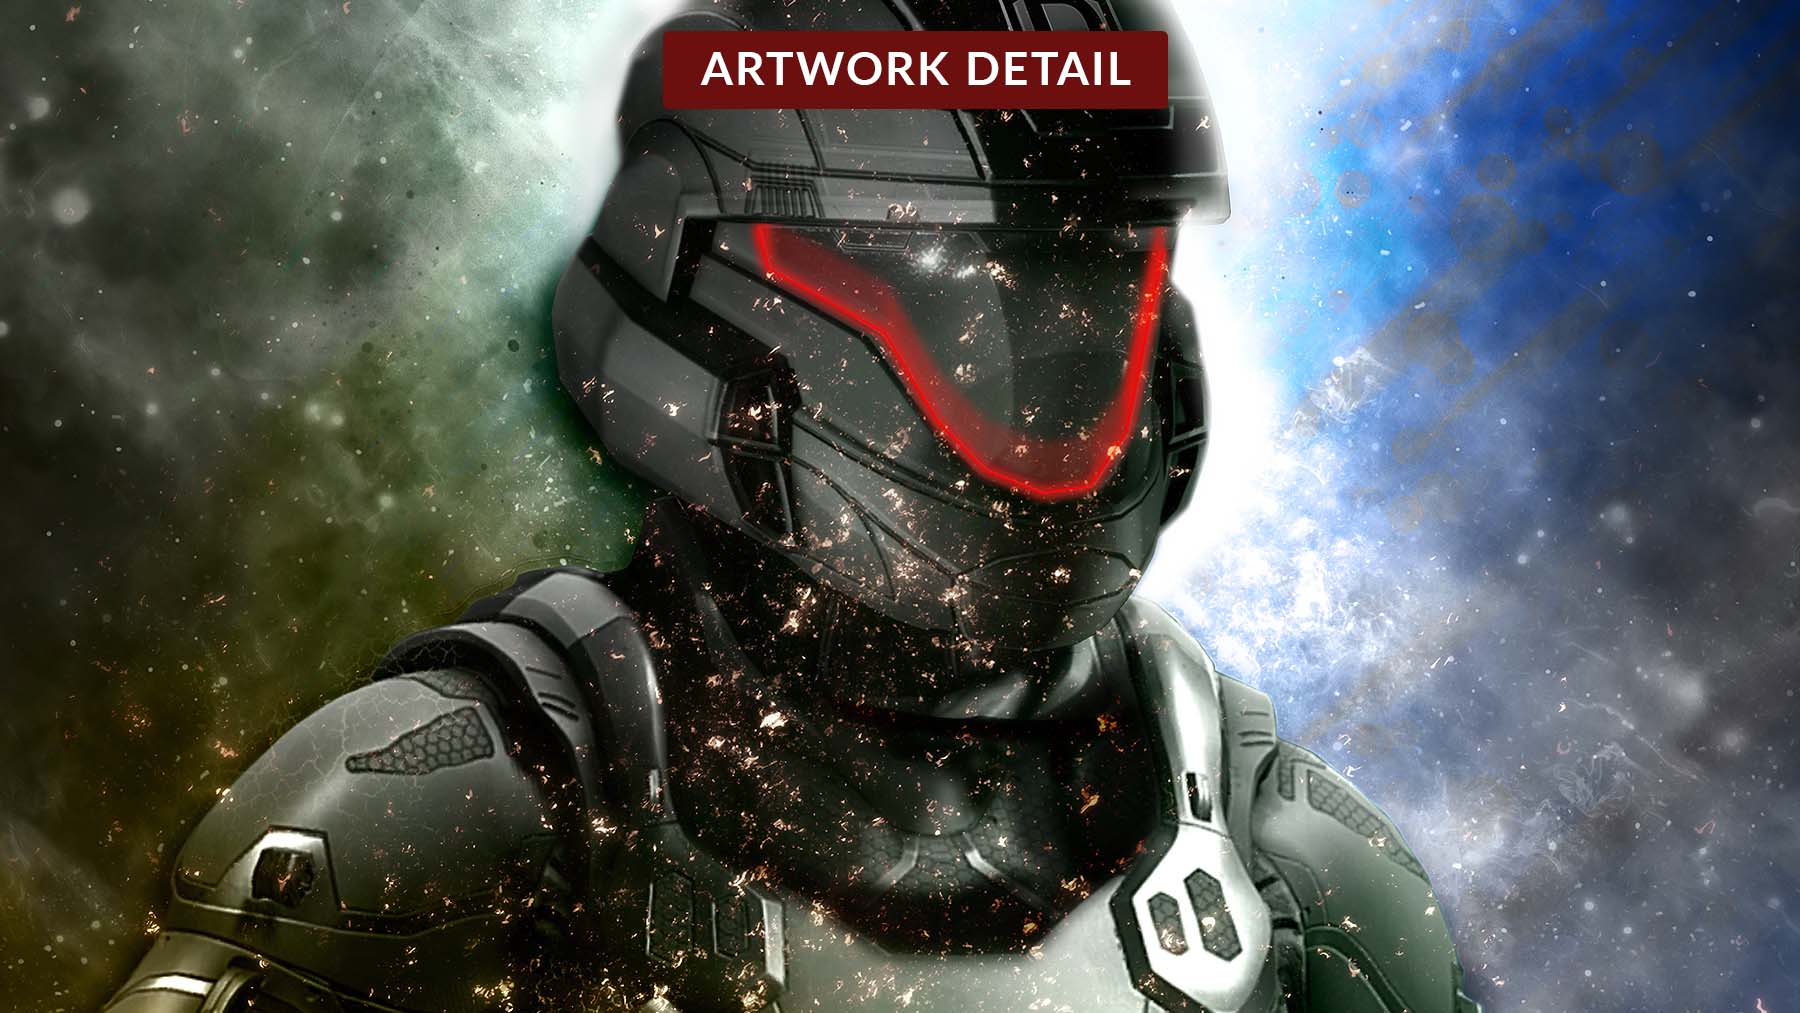 Close-up of the ranger's helmet and exo-armoured suit from the DomiForce Ranger (3rd Gen) NFT artwork